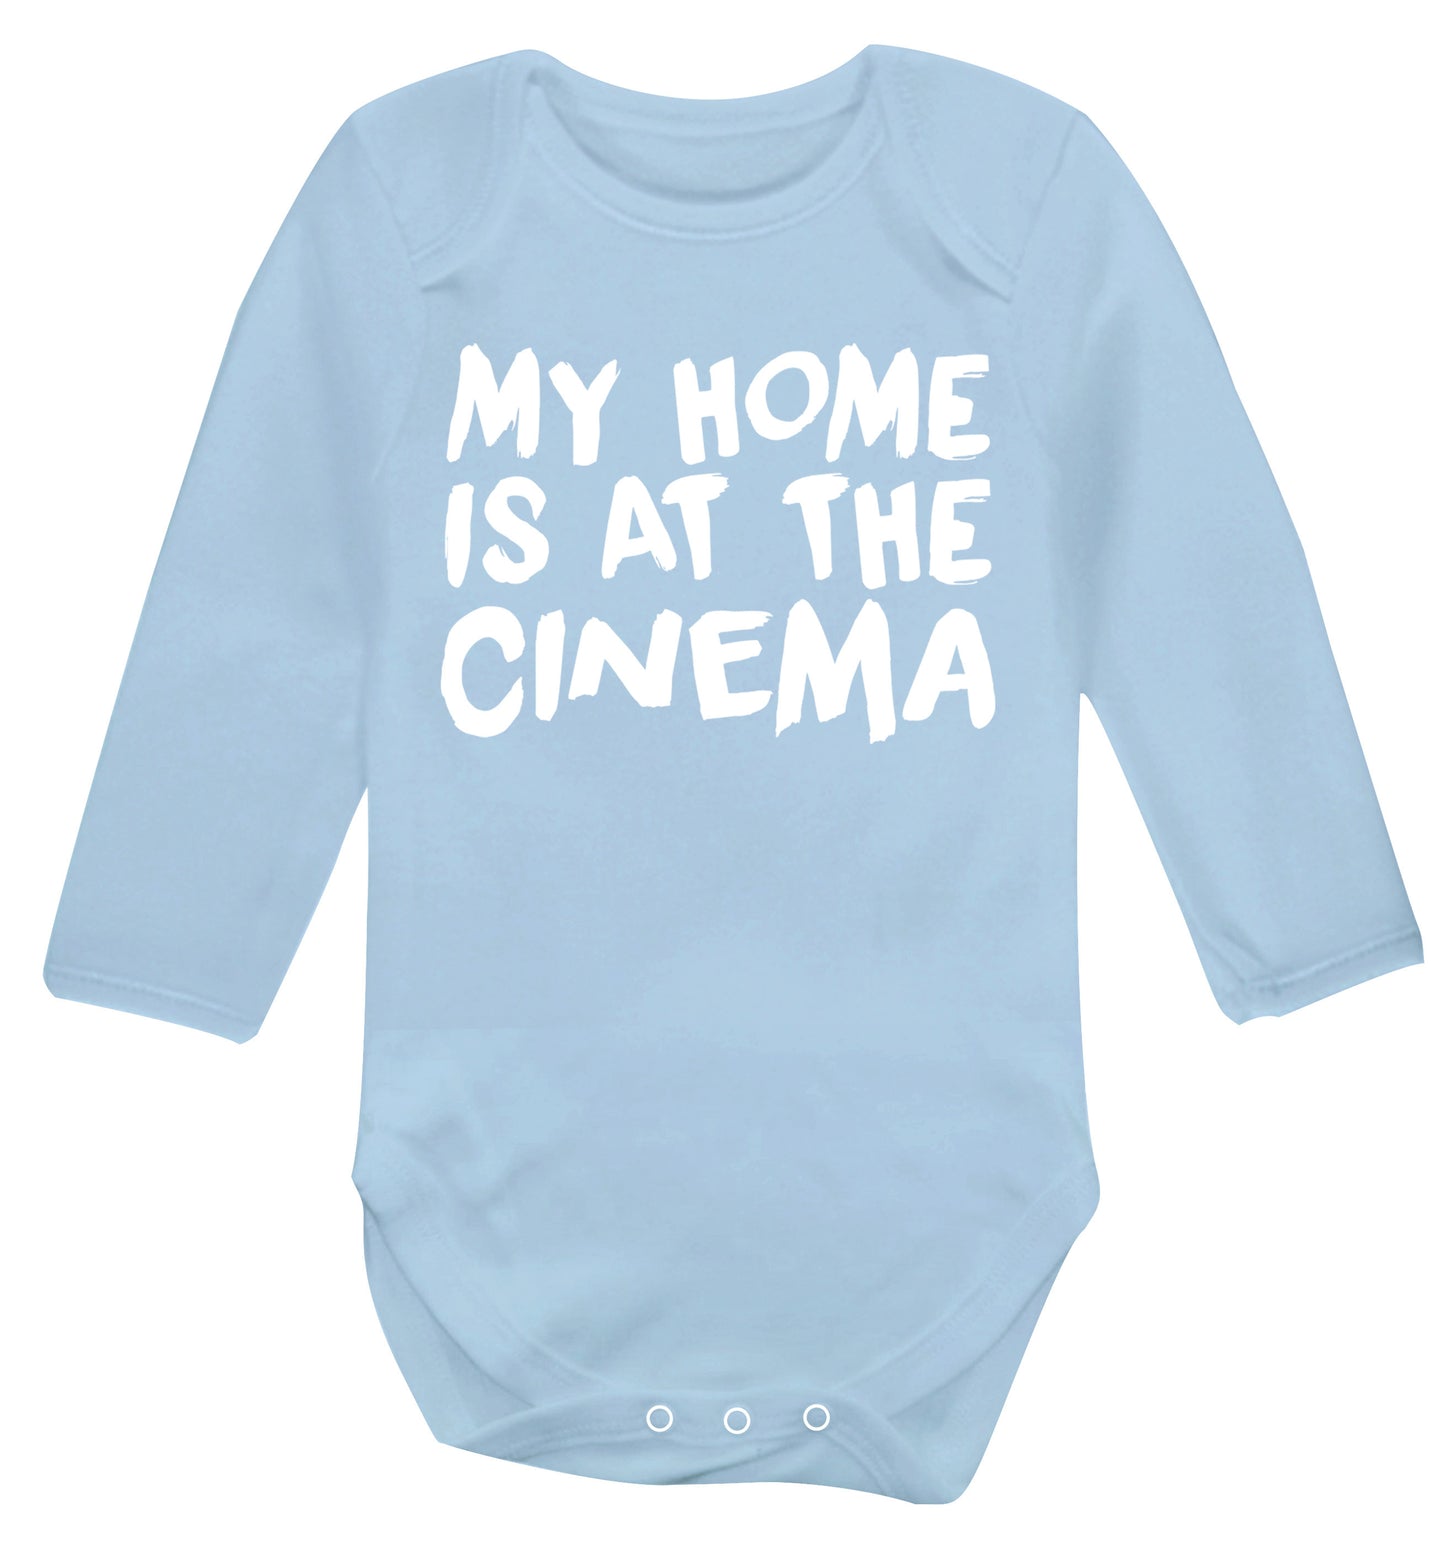 My home is at the cinema Baby Vest long sleeved pale blue 6-12 months